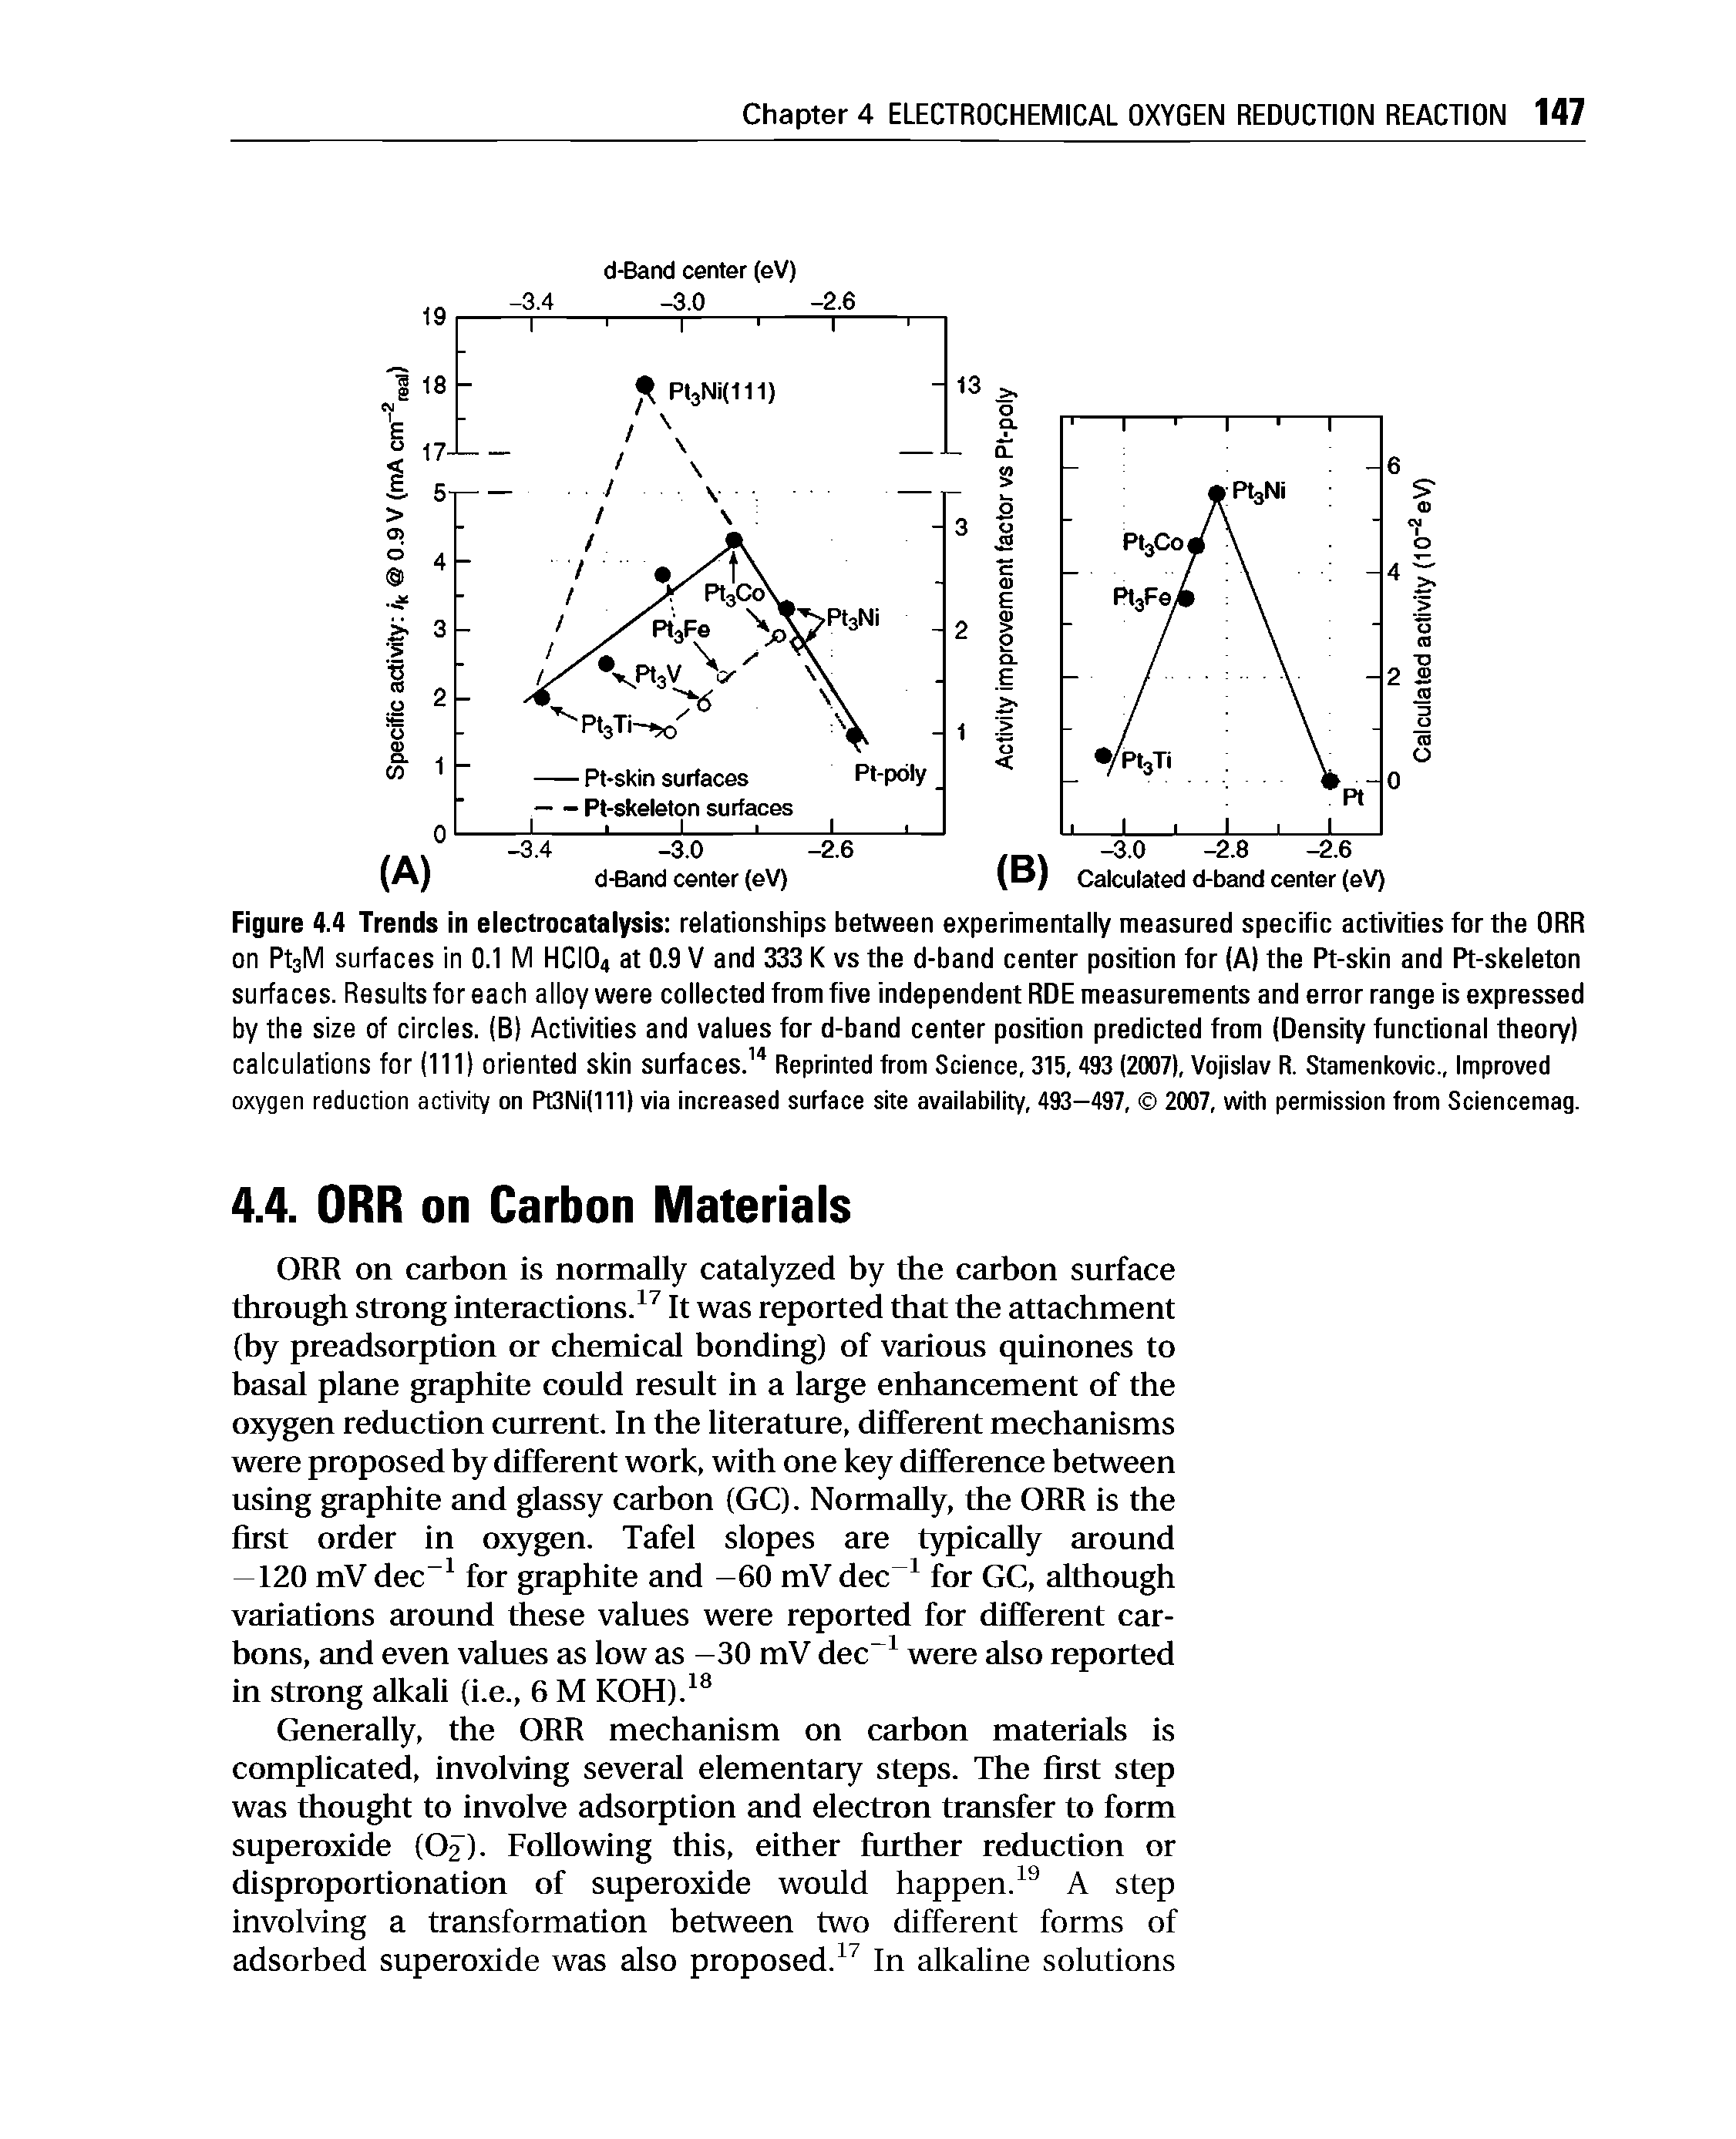 Figure 4.4 Trends in electrocatalysis relationships between experimentally measured specific activities for the ORR on PtsM surfaces in 0.1 M HCIO4 at 0.9 V and 333 K vs the d-band center position for (A) the Pt-skin and Pt-skeleton surfaces. Results for each alloy were collected from five independent RDE measurements and error range is expressed by the size of circles. (B) Activities and values for d-band center position predicted from (Density functional theory) calculations for (111) oriented skin surfaces. Reprinted from Science, 315,493 (2007), Vojislav R. Stamenkovic., Improved oxygen reduction activity on Pt3Ni(lll) via increased surface site availability, 493—497, 2007, with permission from Sciencemag.